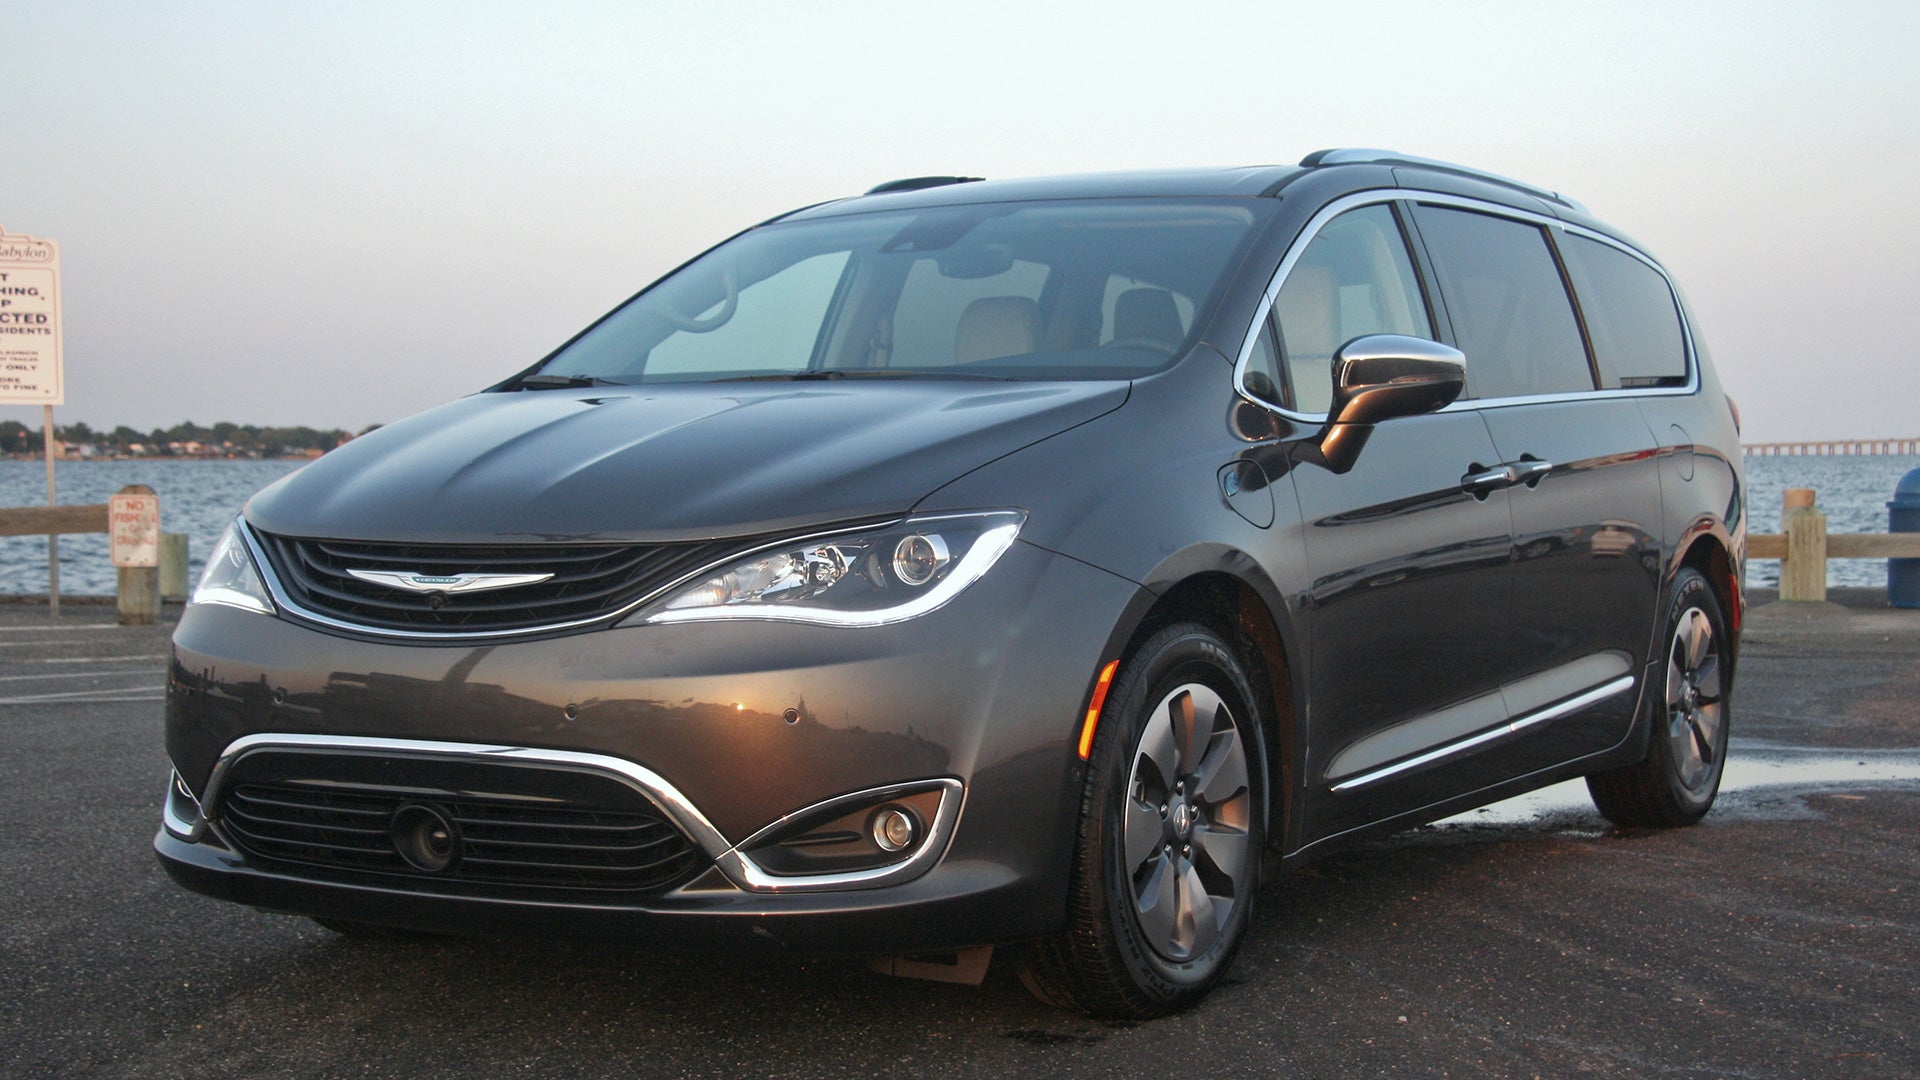 2019 Chrysler Pacifica Hybrid New Dad Review: This Plug-In Minivan Makes a  Comfy Cruiser